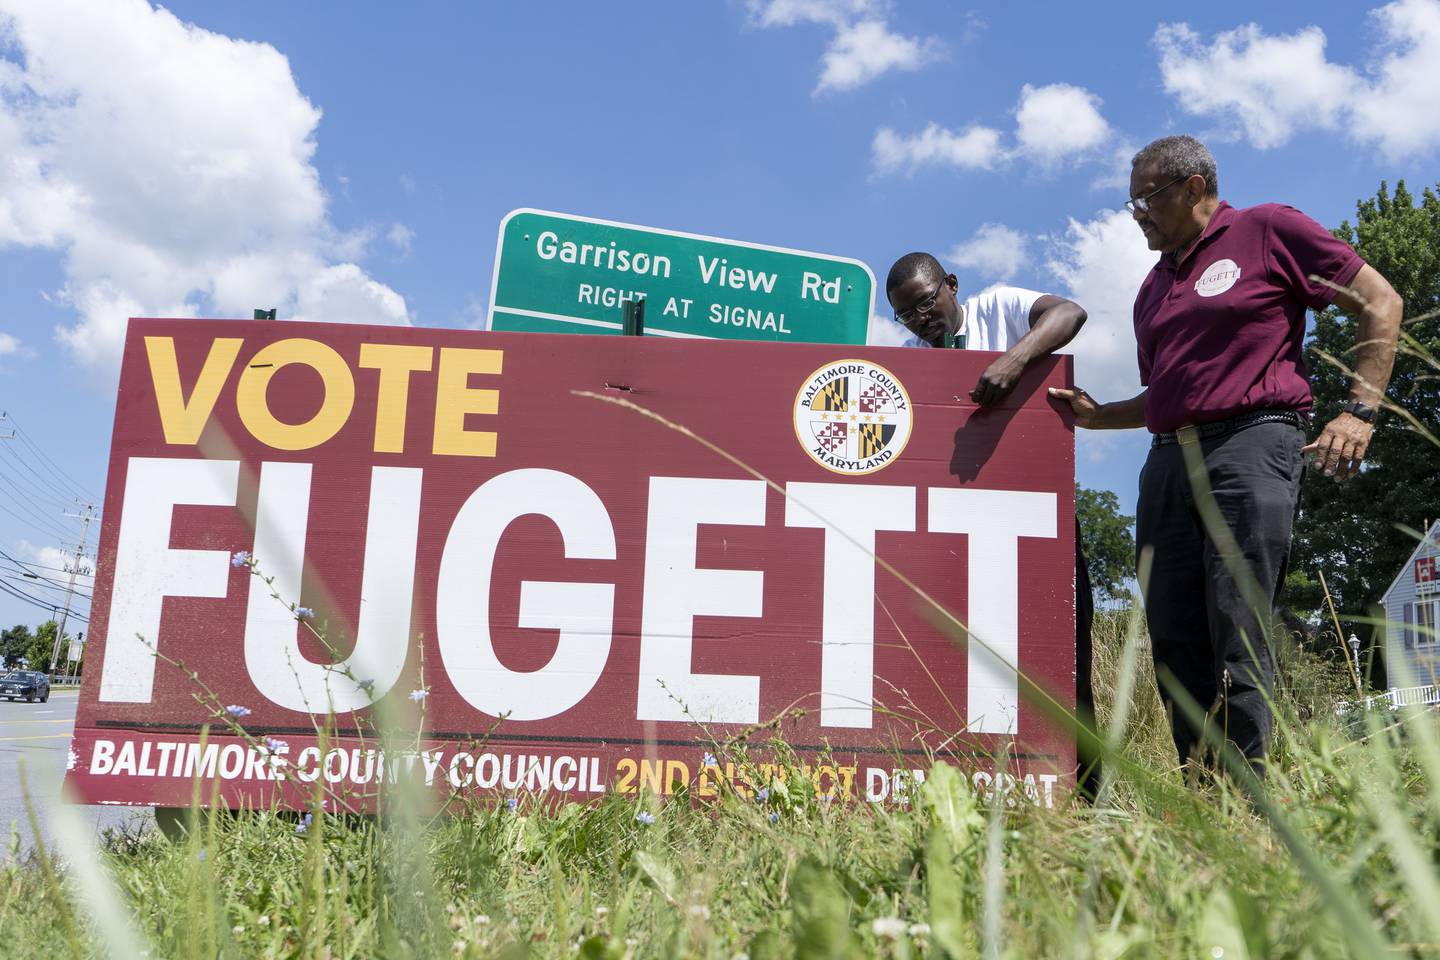 Tony Fugett and Andy Pierre install a campaign sign on Reisterstown Road.